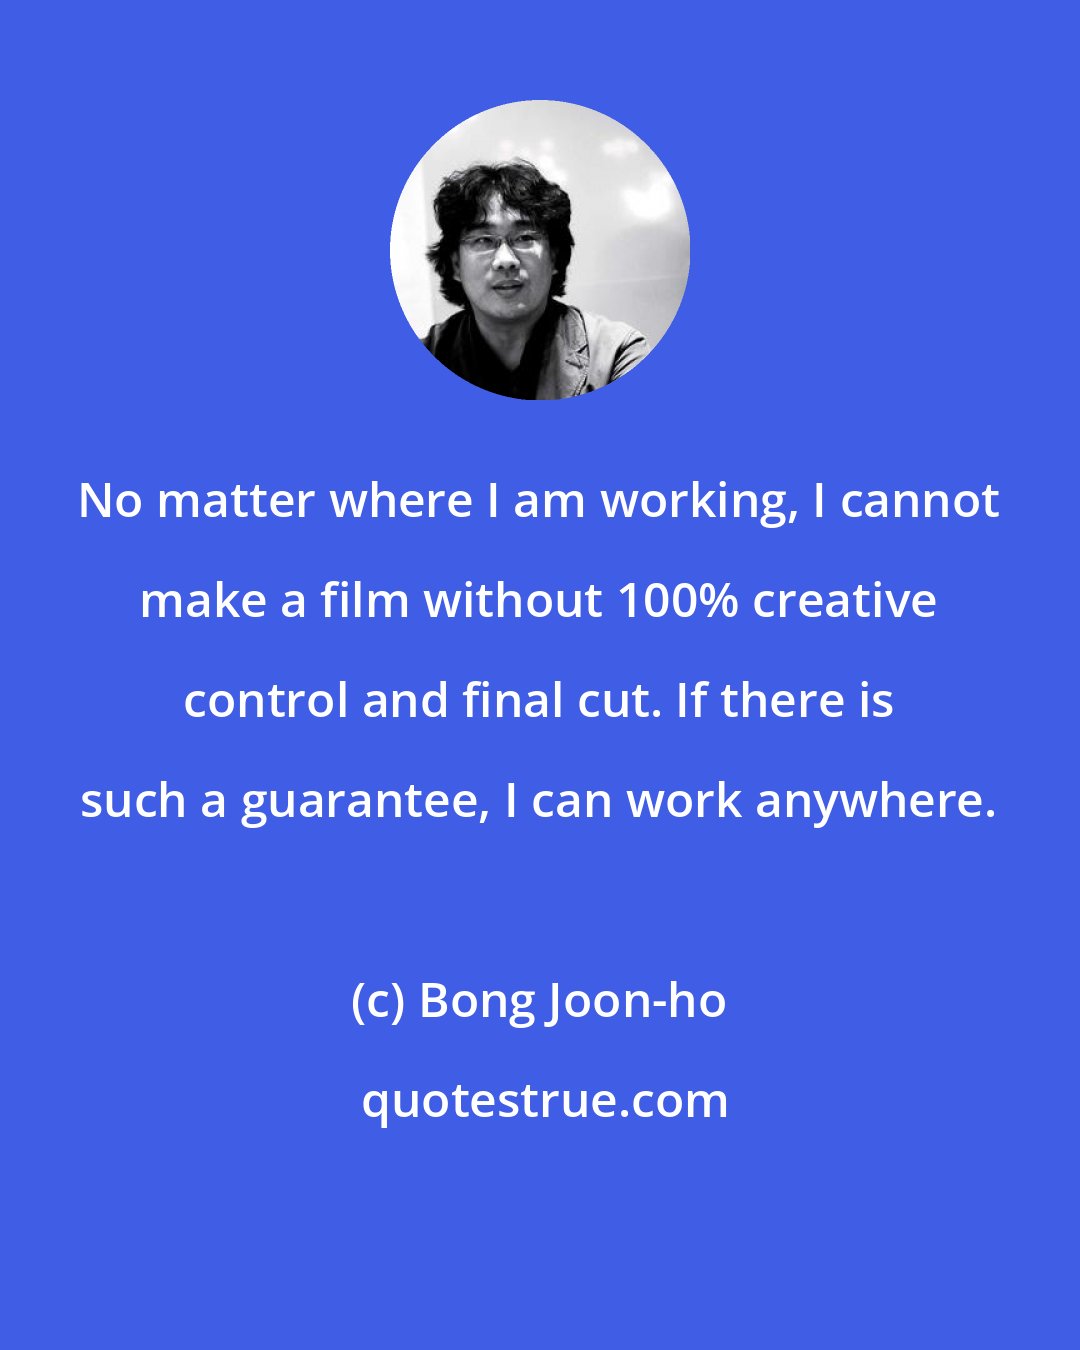 Bong Joon-ho: No matter where I am working, I cannot make a film without 100% creative control and final cut. If there is such a guarantee, I can work anywhere.